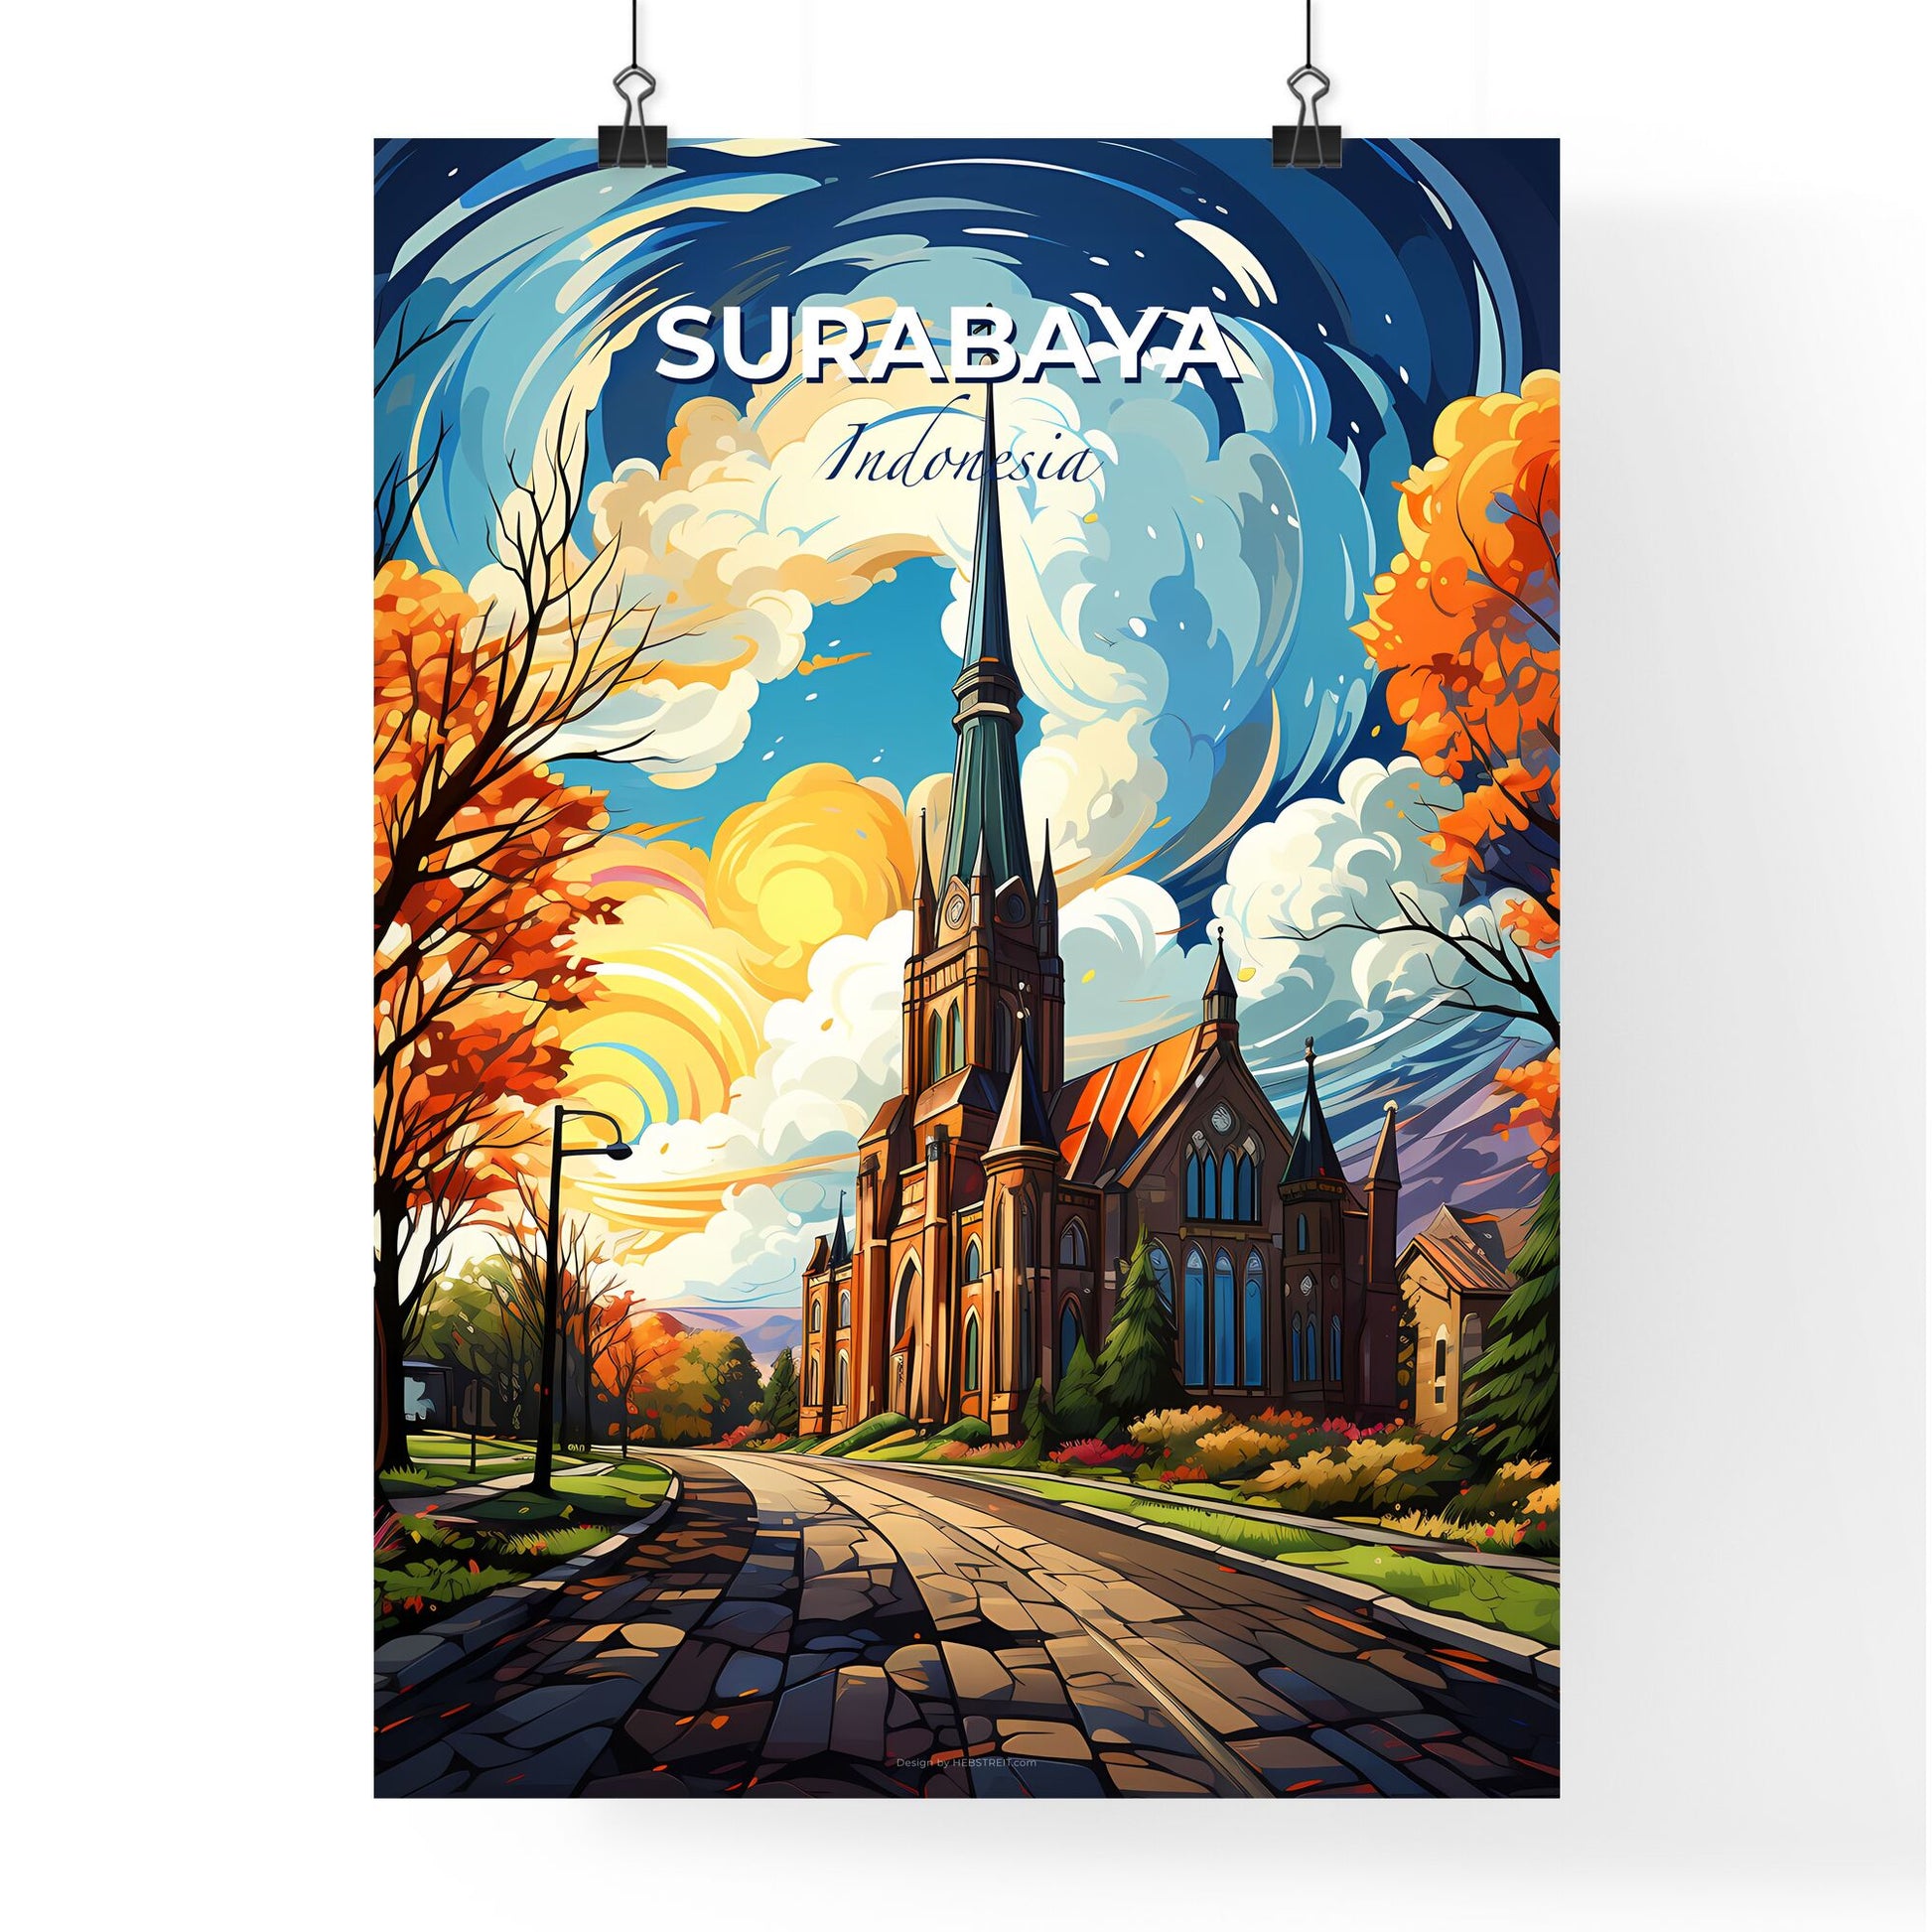 Vibrant Art Painting of Surabaya Indonesia Skyline with Church Steeple, Trees, and Road Default Title